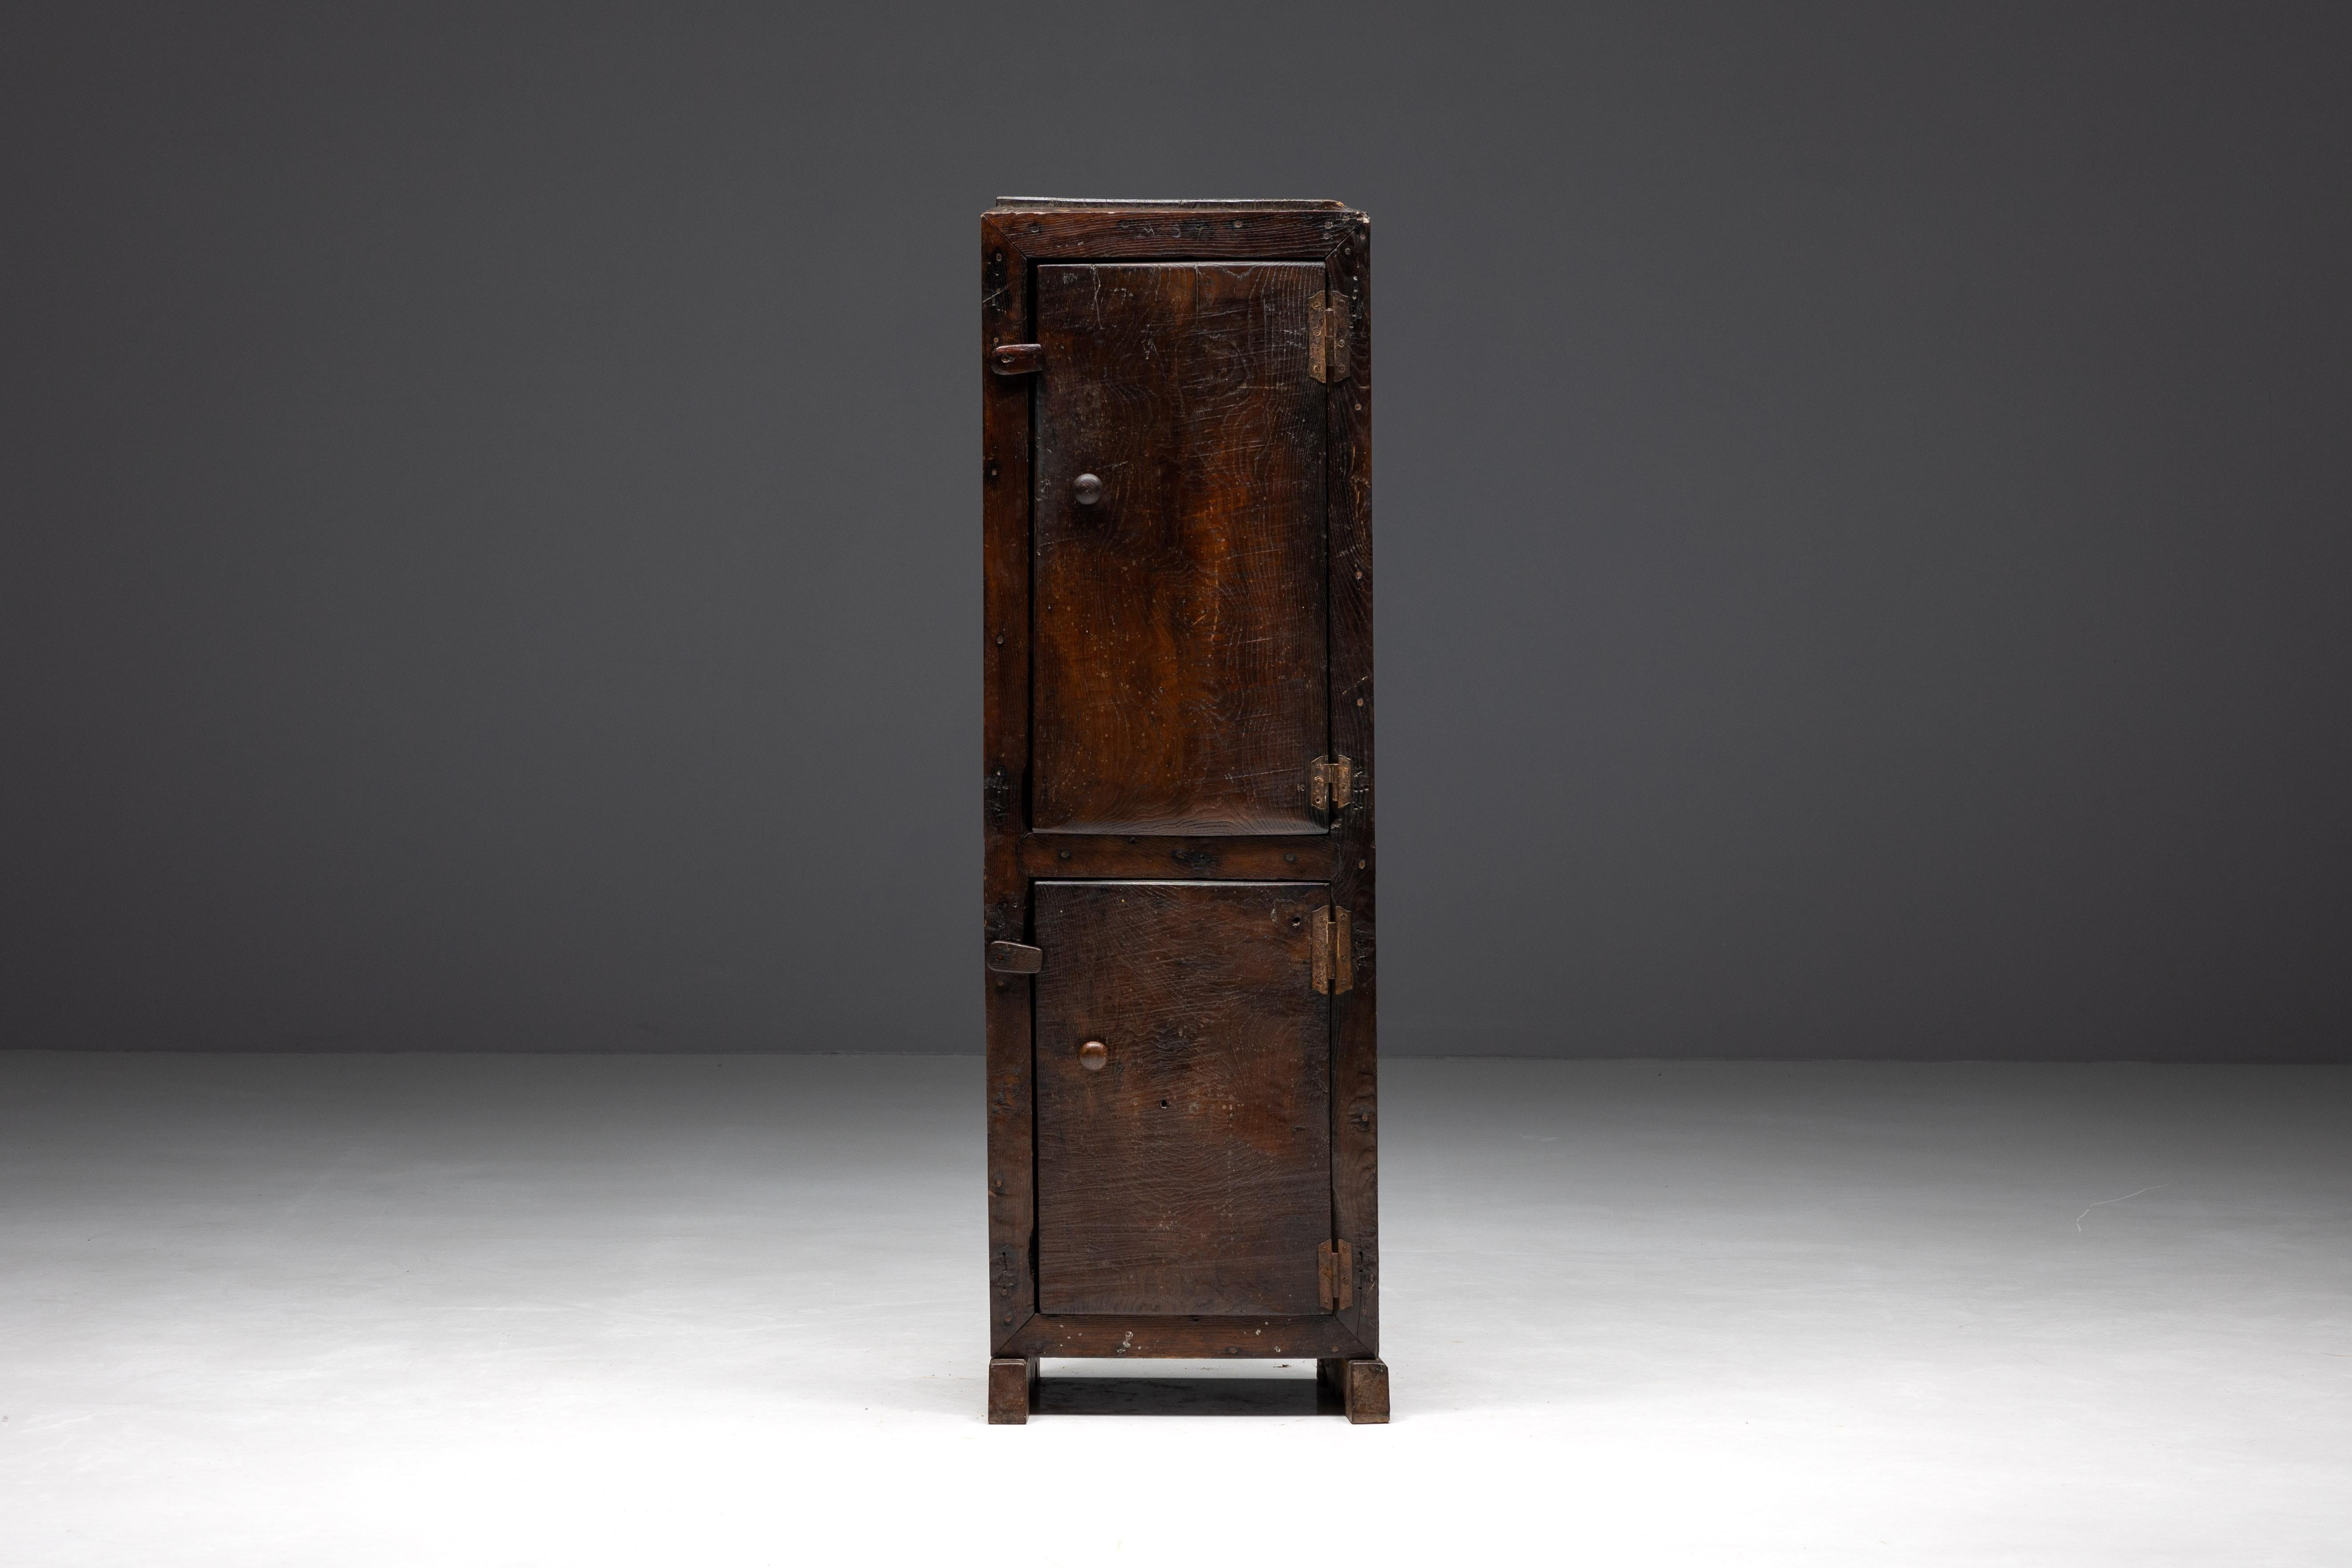 Rustic monoxylite cabinet from 19th century France, showcasing the timeless craftsmanship of that era. Its solid dark wood construction and one-of-a-kind monoxylite wooden back not only offer generous storage space and display options but also